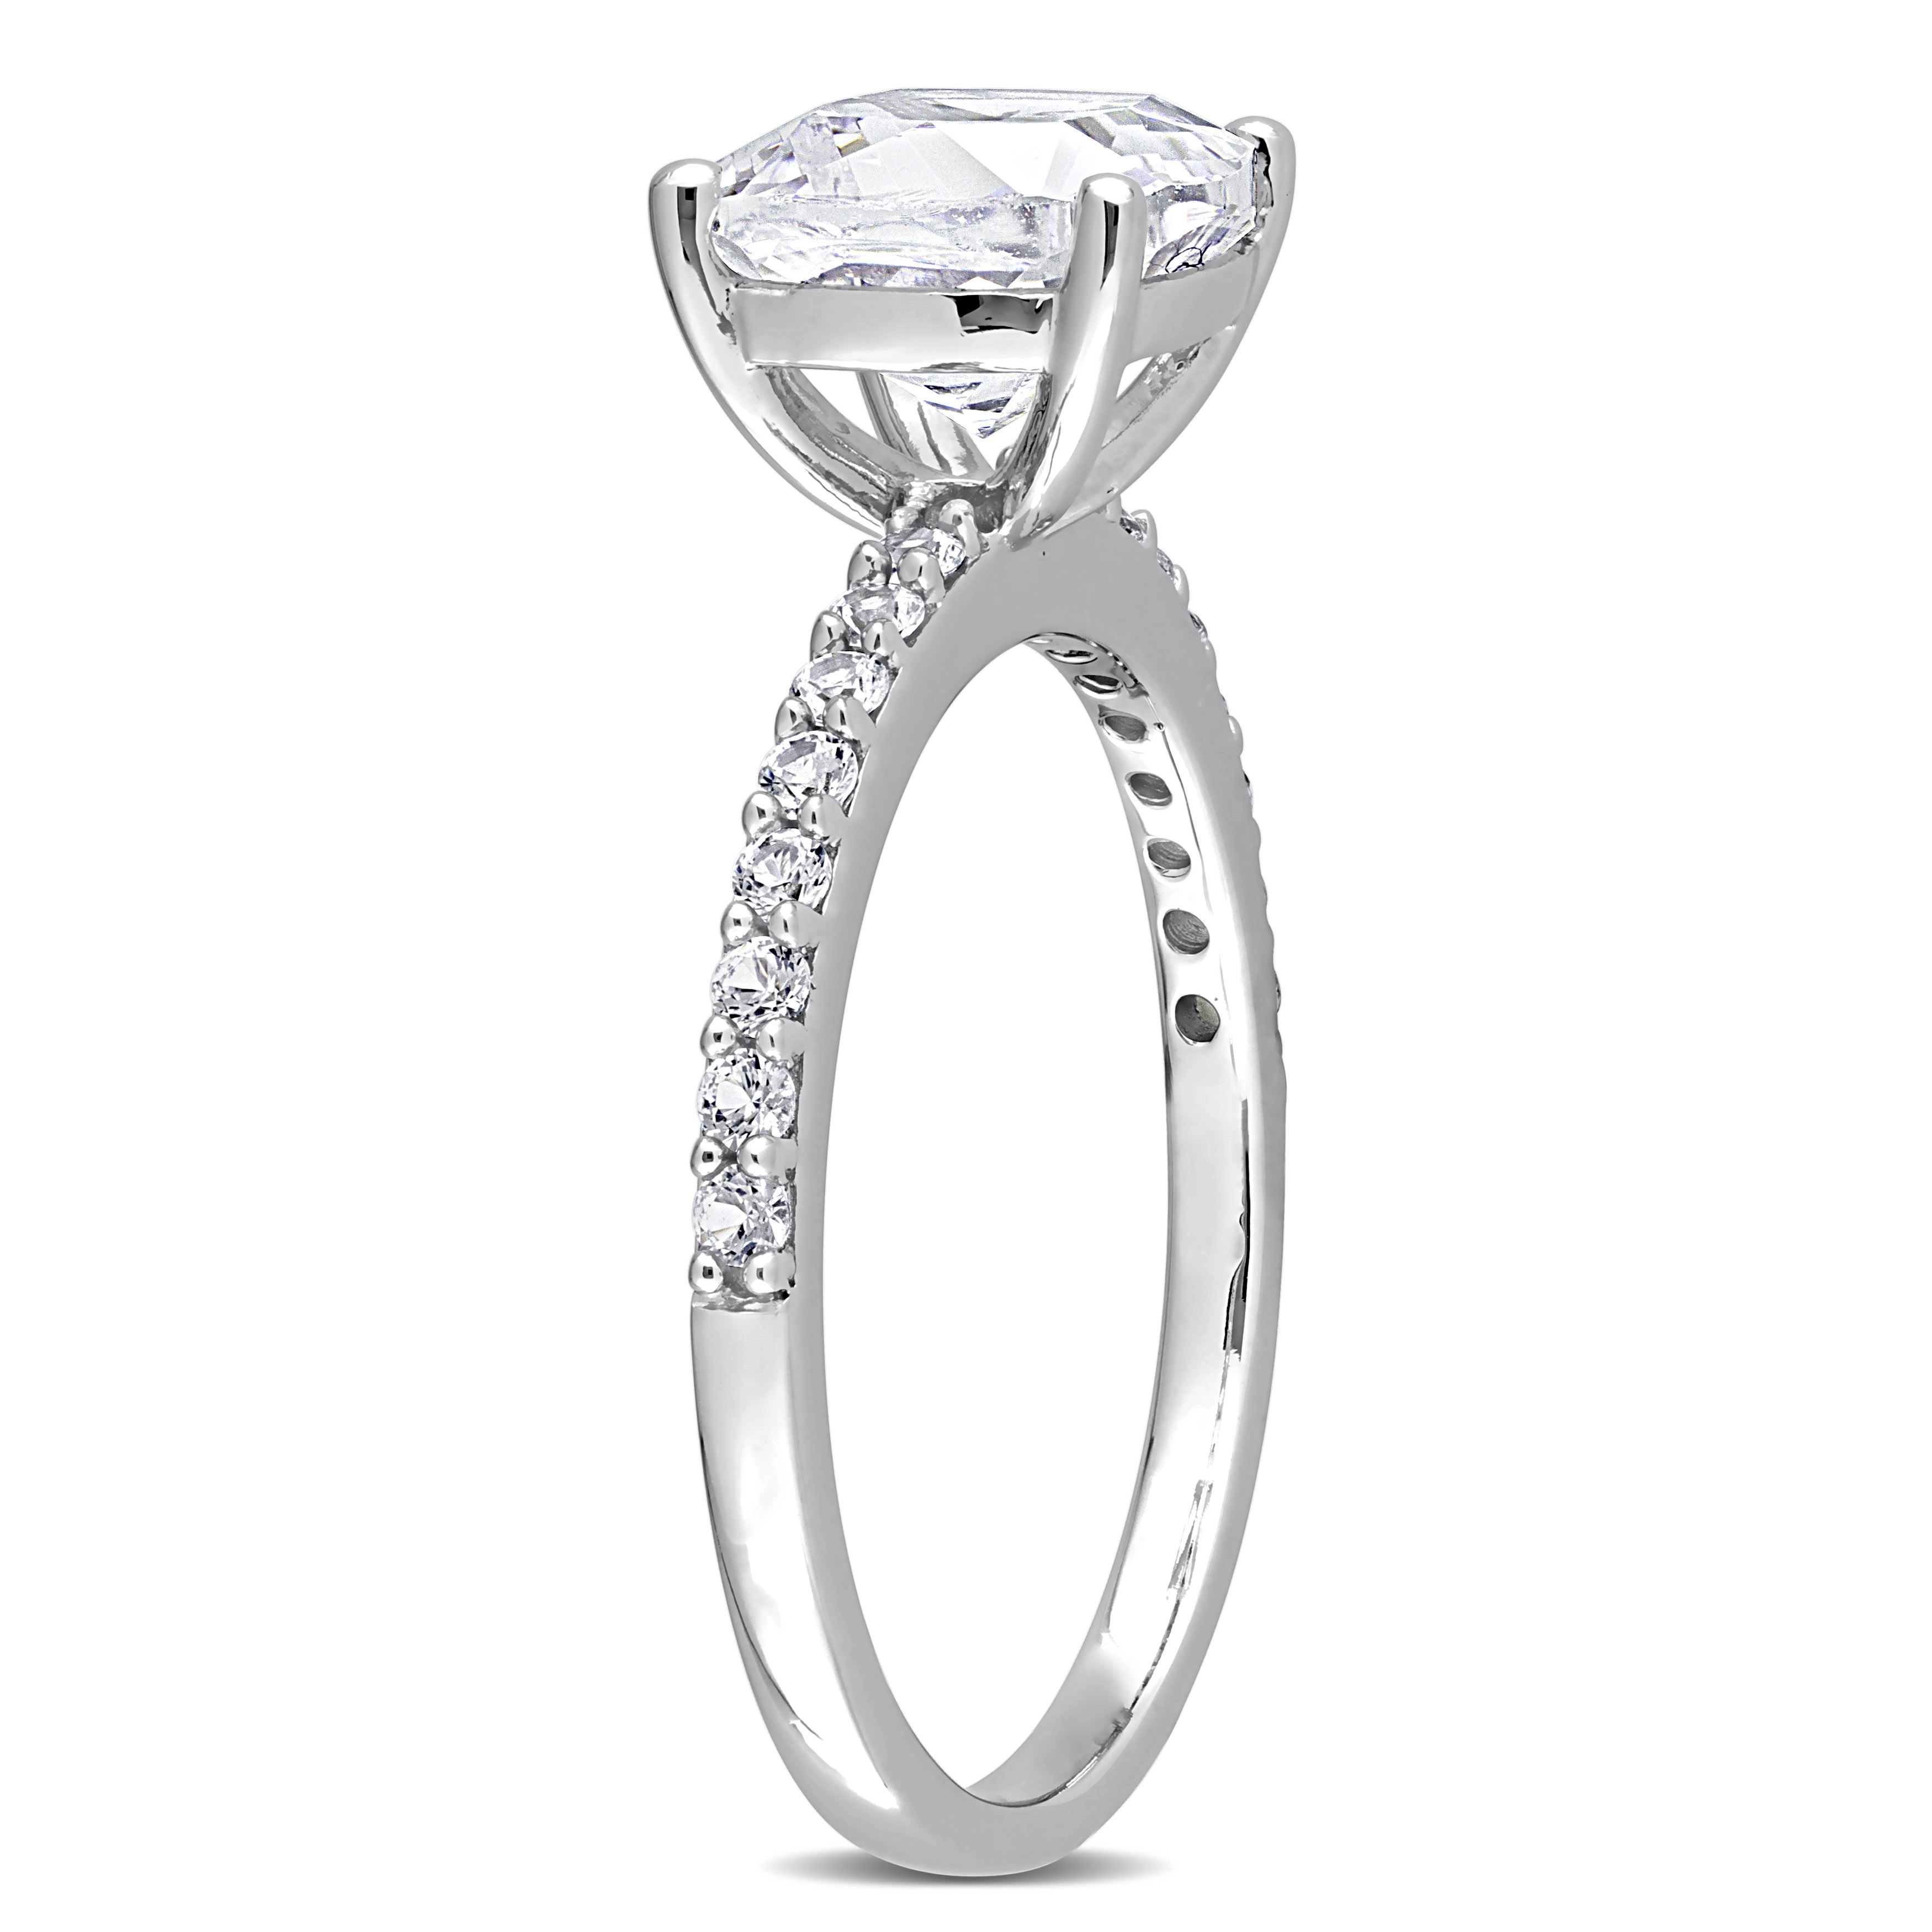 3 1/4 CT TGW Cushion Cut Created White Sapphire Solitaire Engagement Ring in 10k White Gold